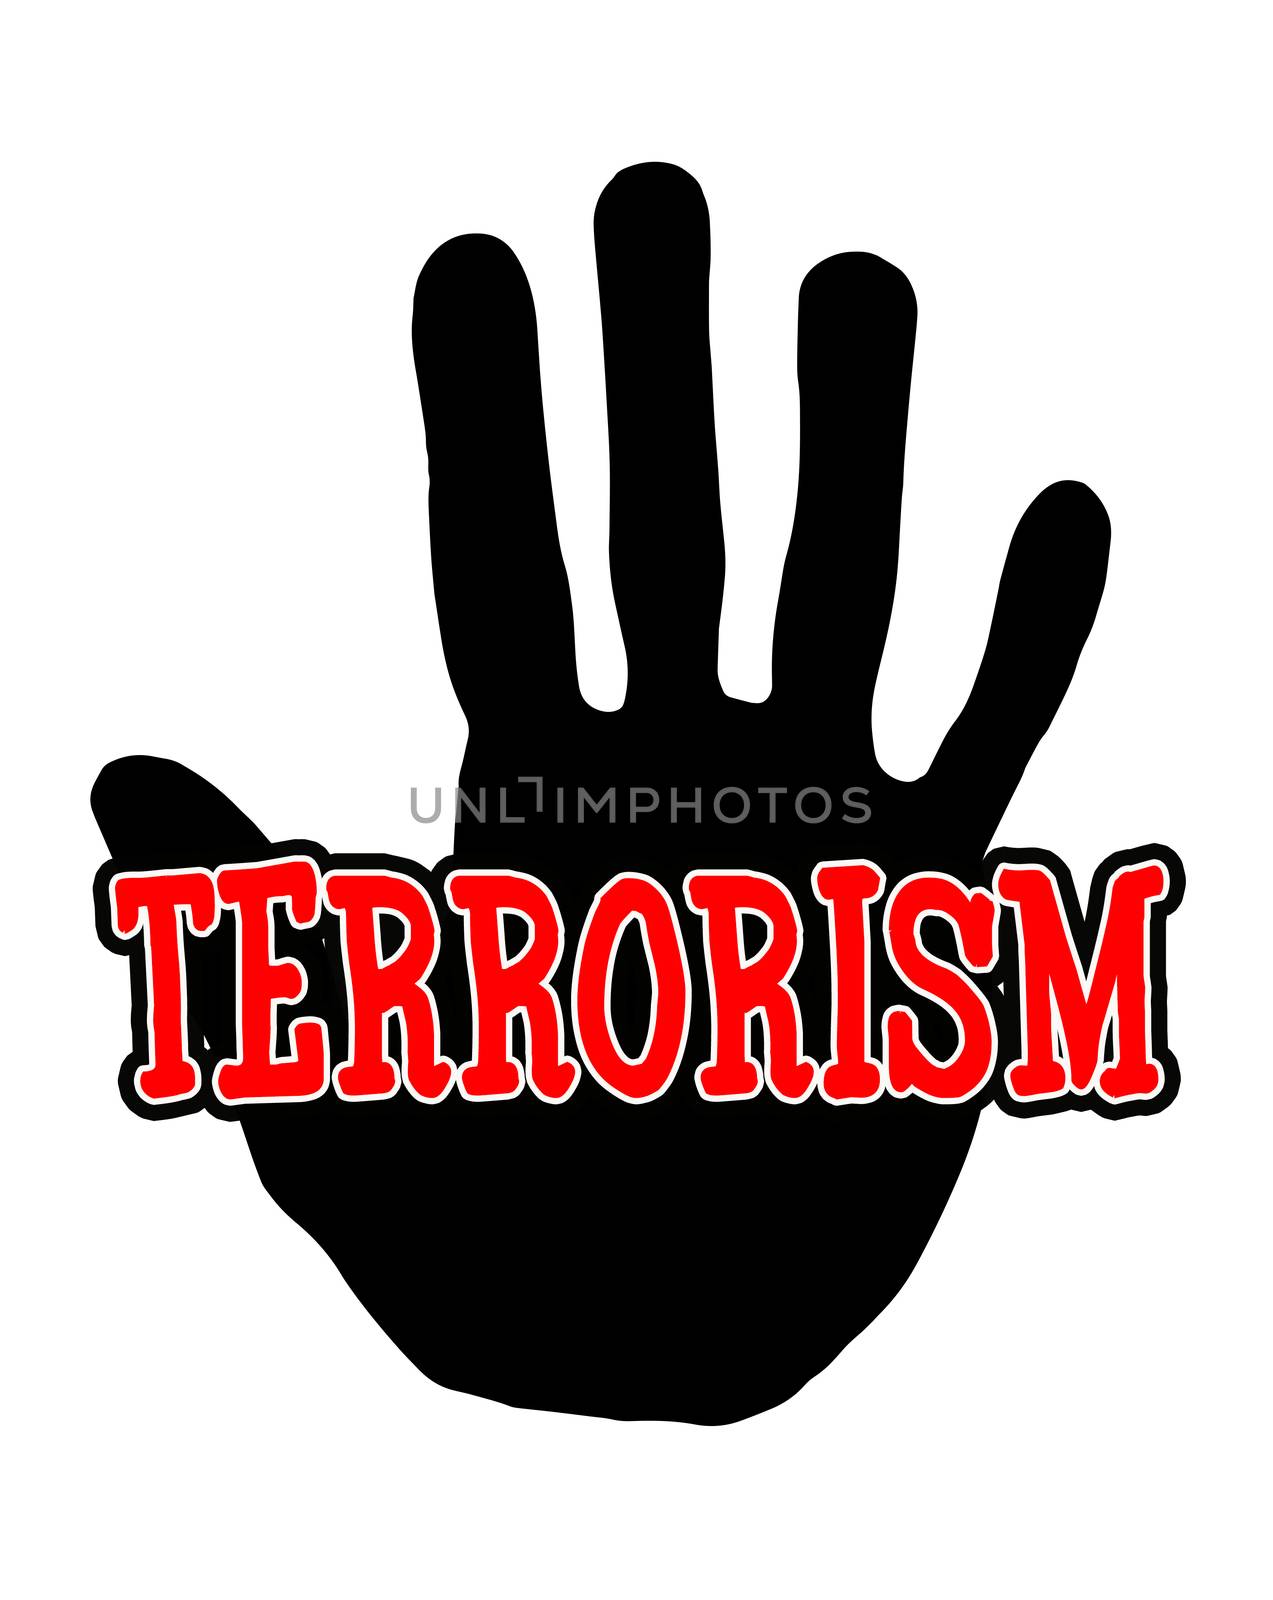 Man handprint isolated on white background showing stop terrorism